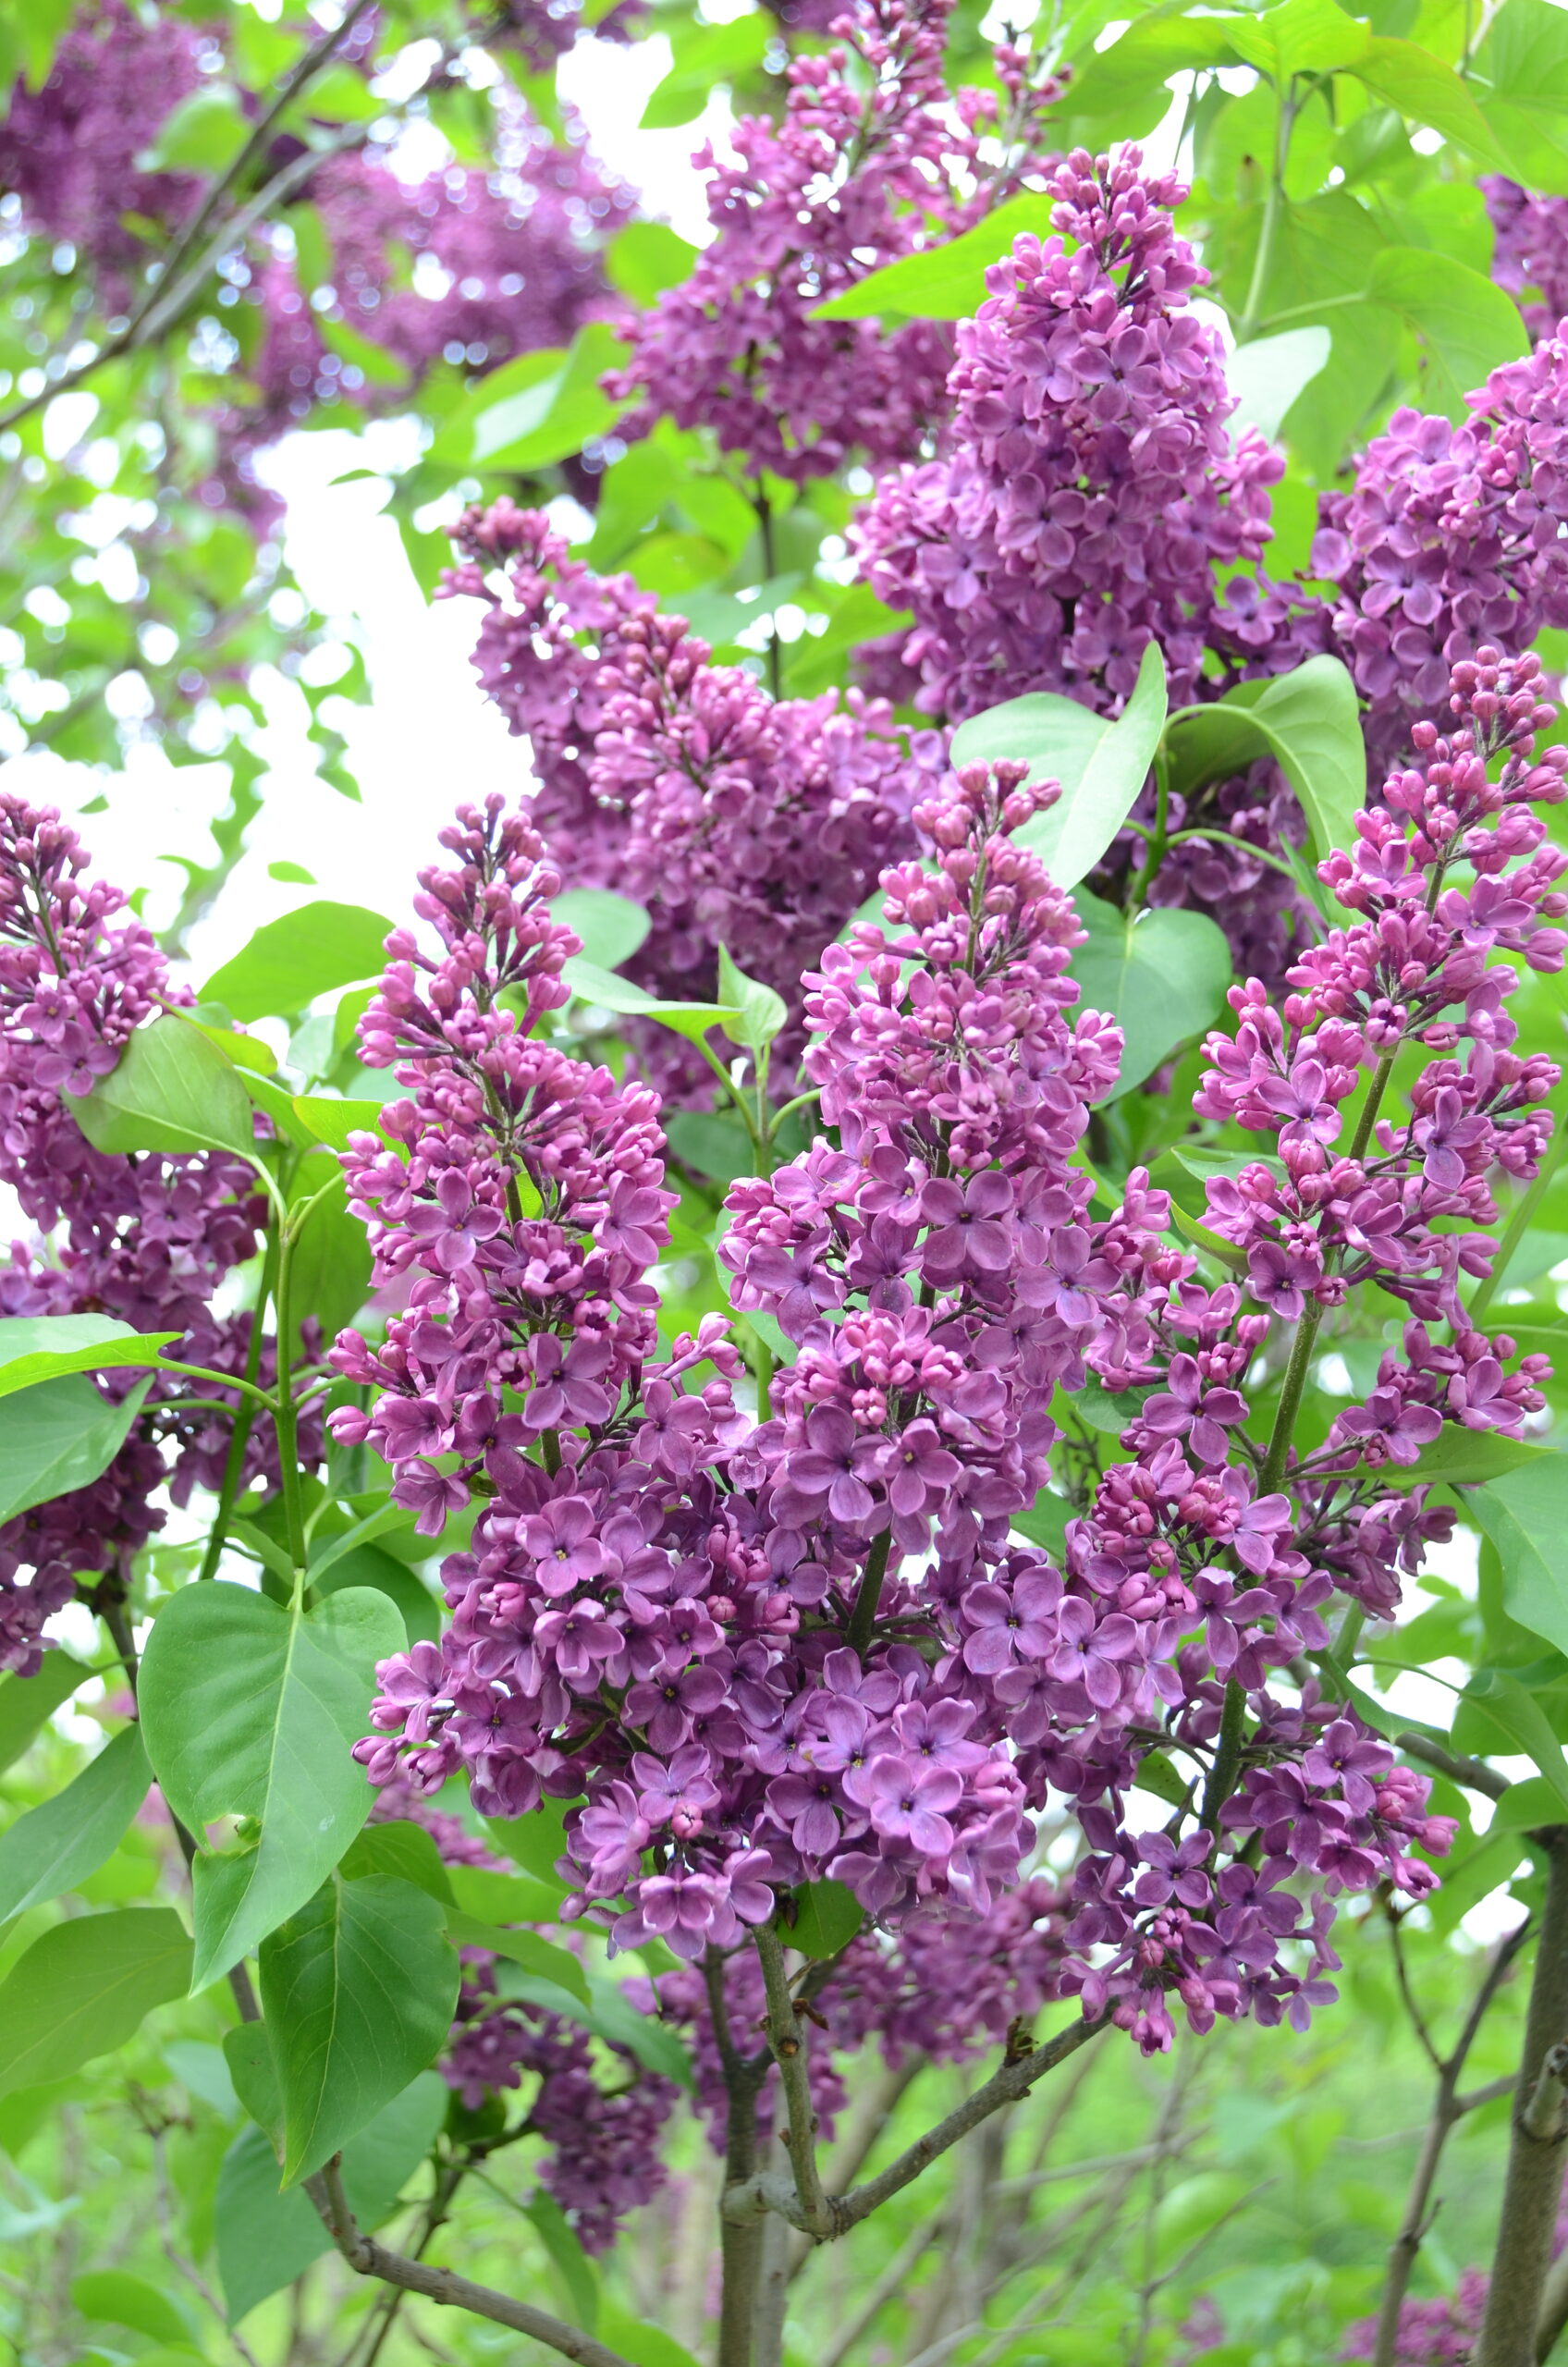 A classic lilac in the classic lilac color. Young pencil-thick stems are the best for cuts, and thinning stems for cuts results in more flowering stems the following year.